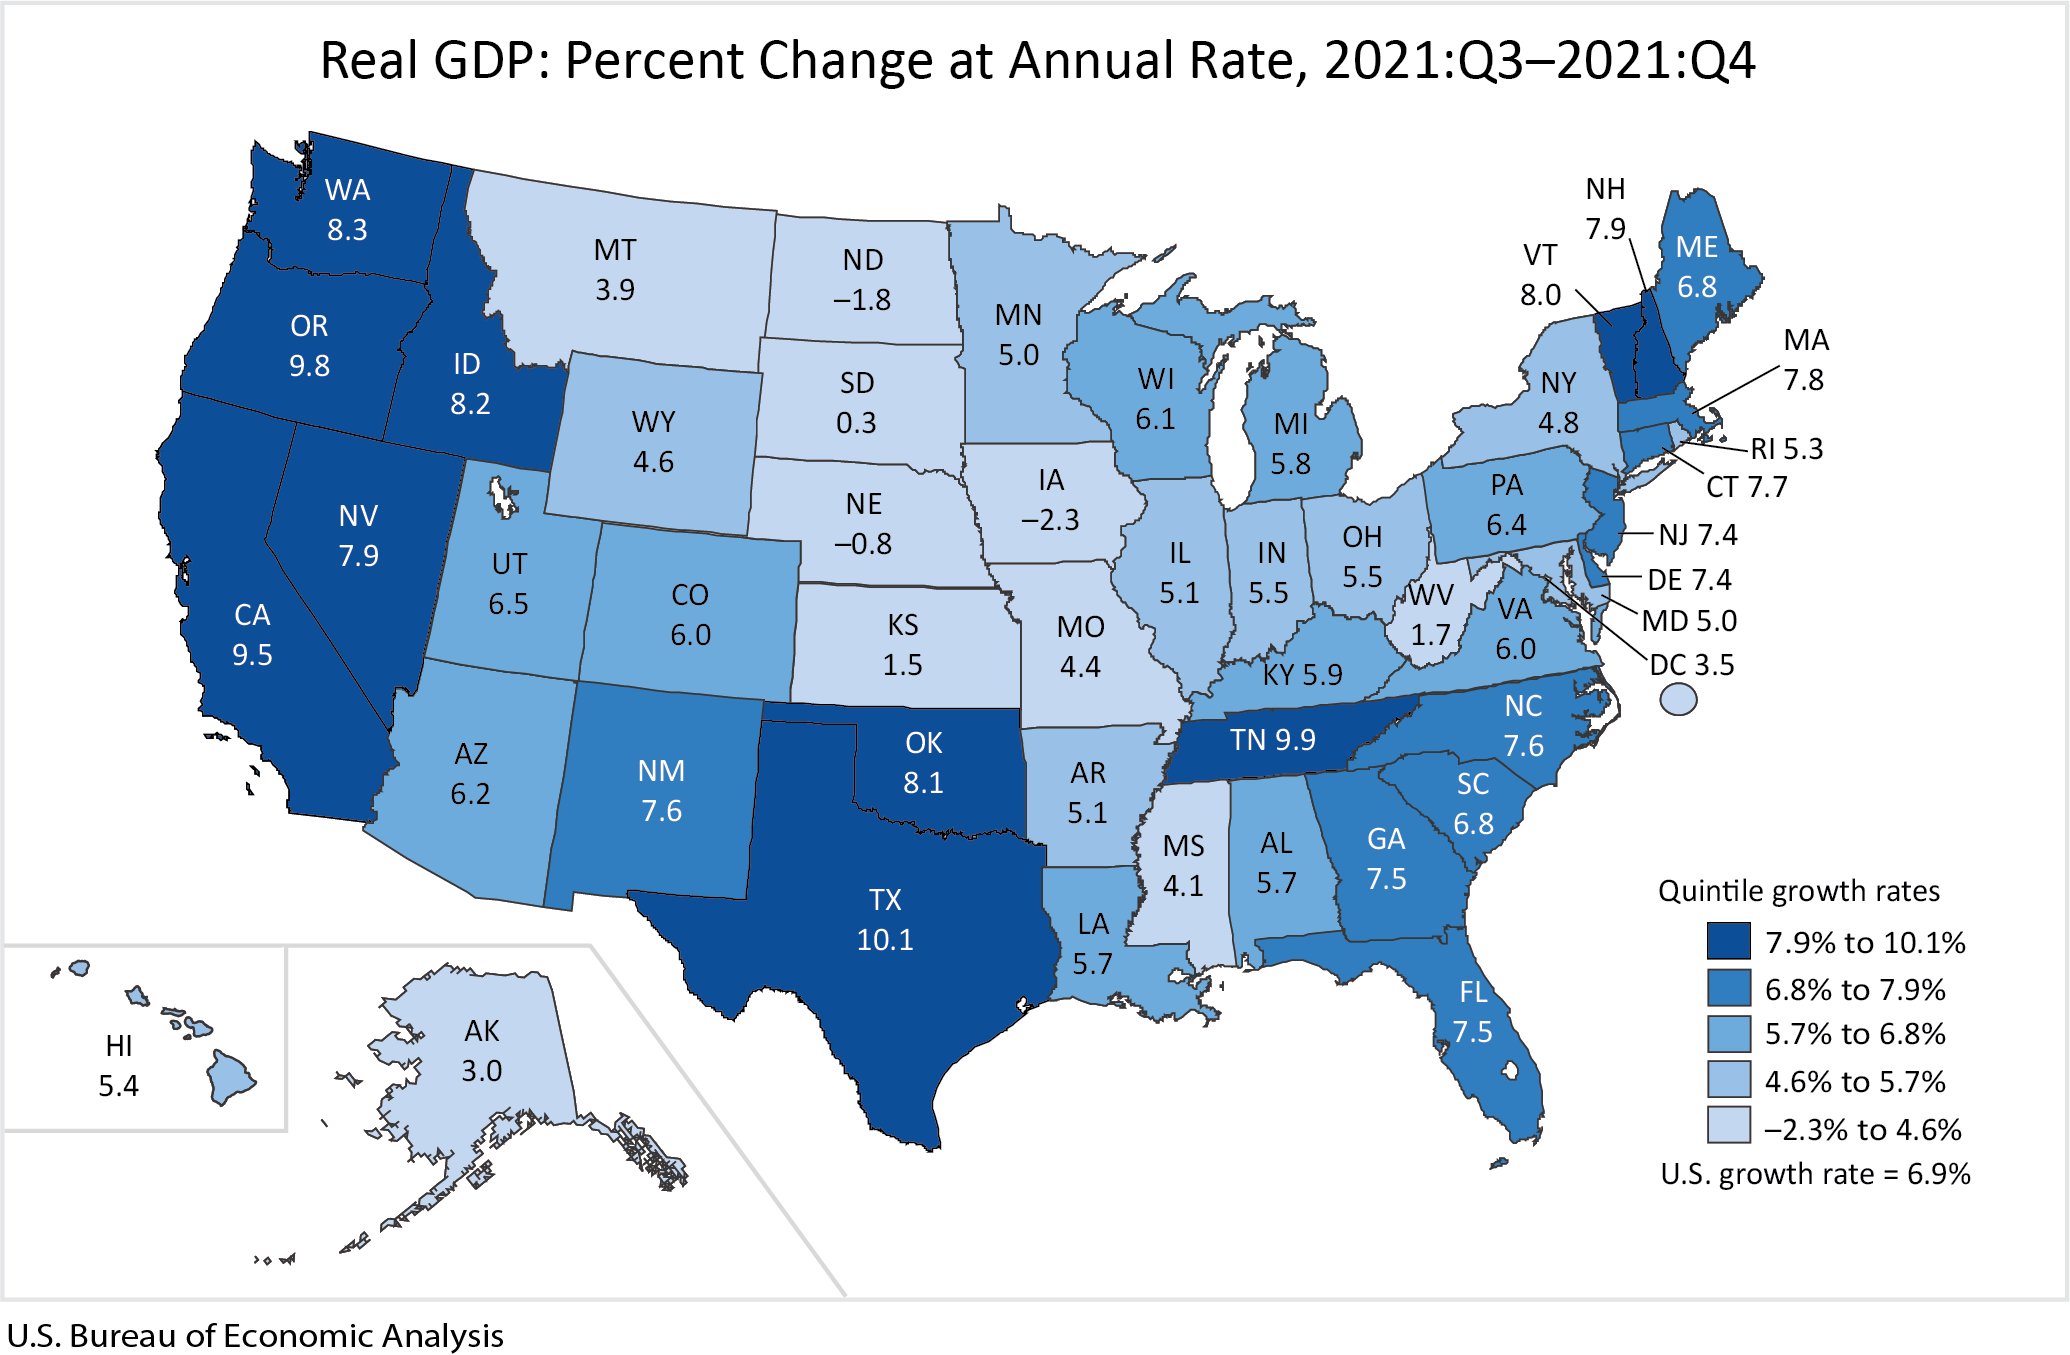 Real GDP: Percent Change at Annual Rate, 2021:Q3-2021:Q4